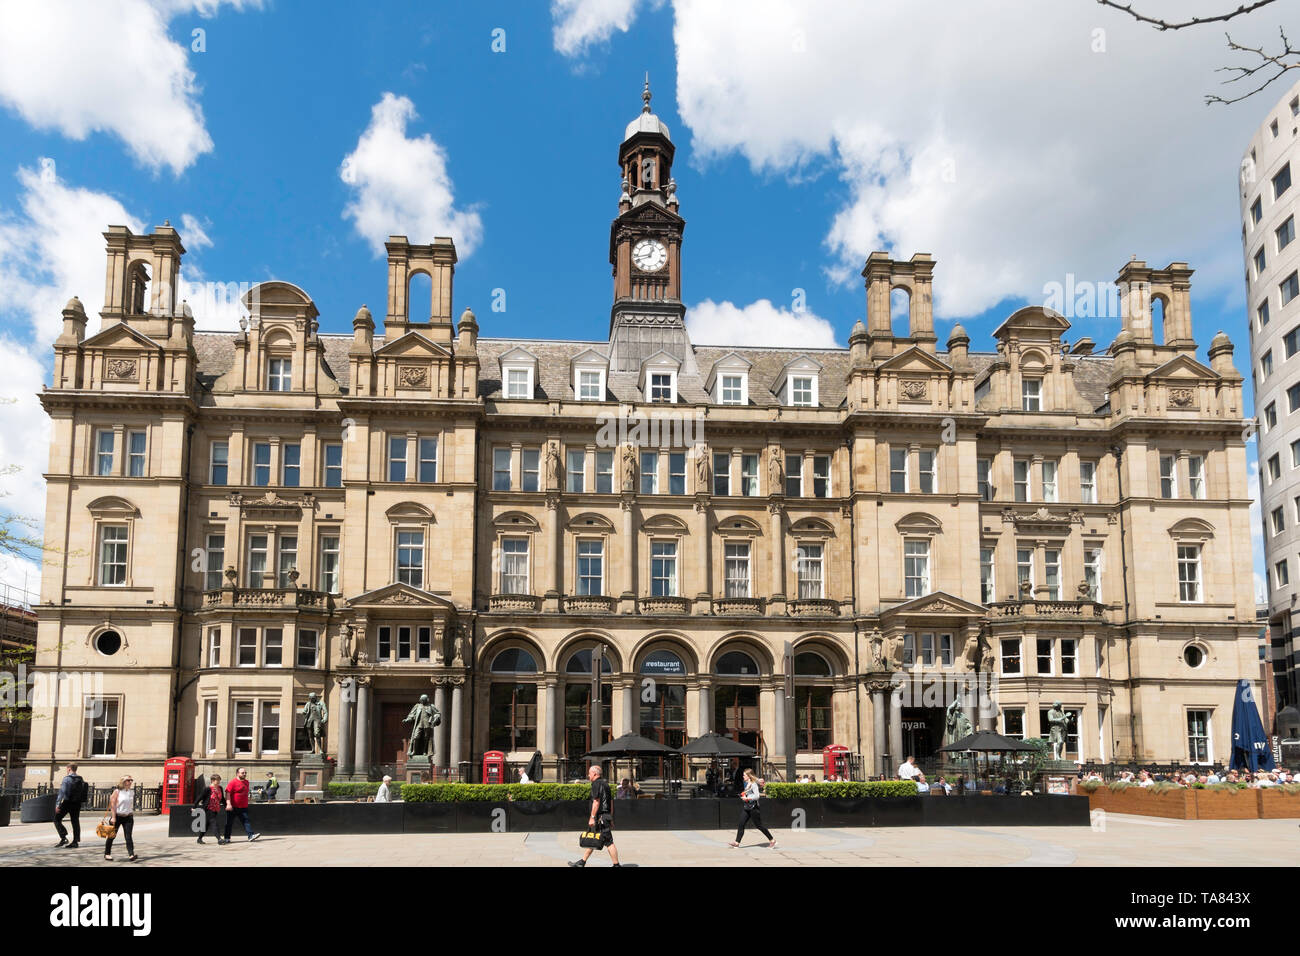 The former General Post Office building in City Square, Leeds city centre, Yorkshire, England, UK Stock Photo